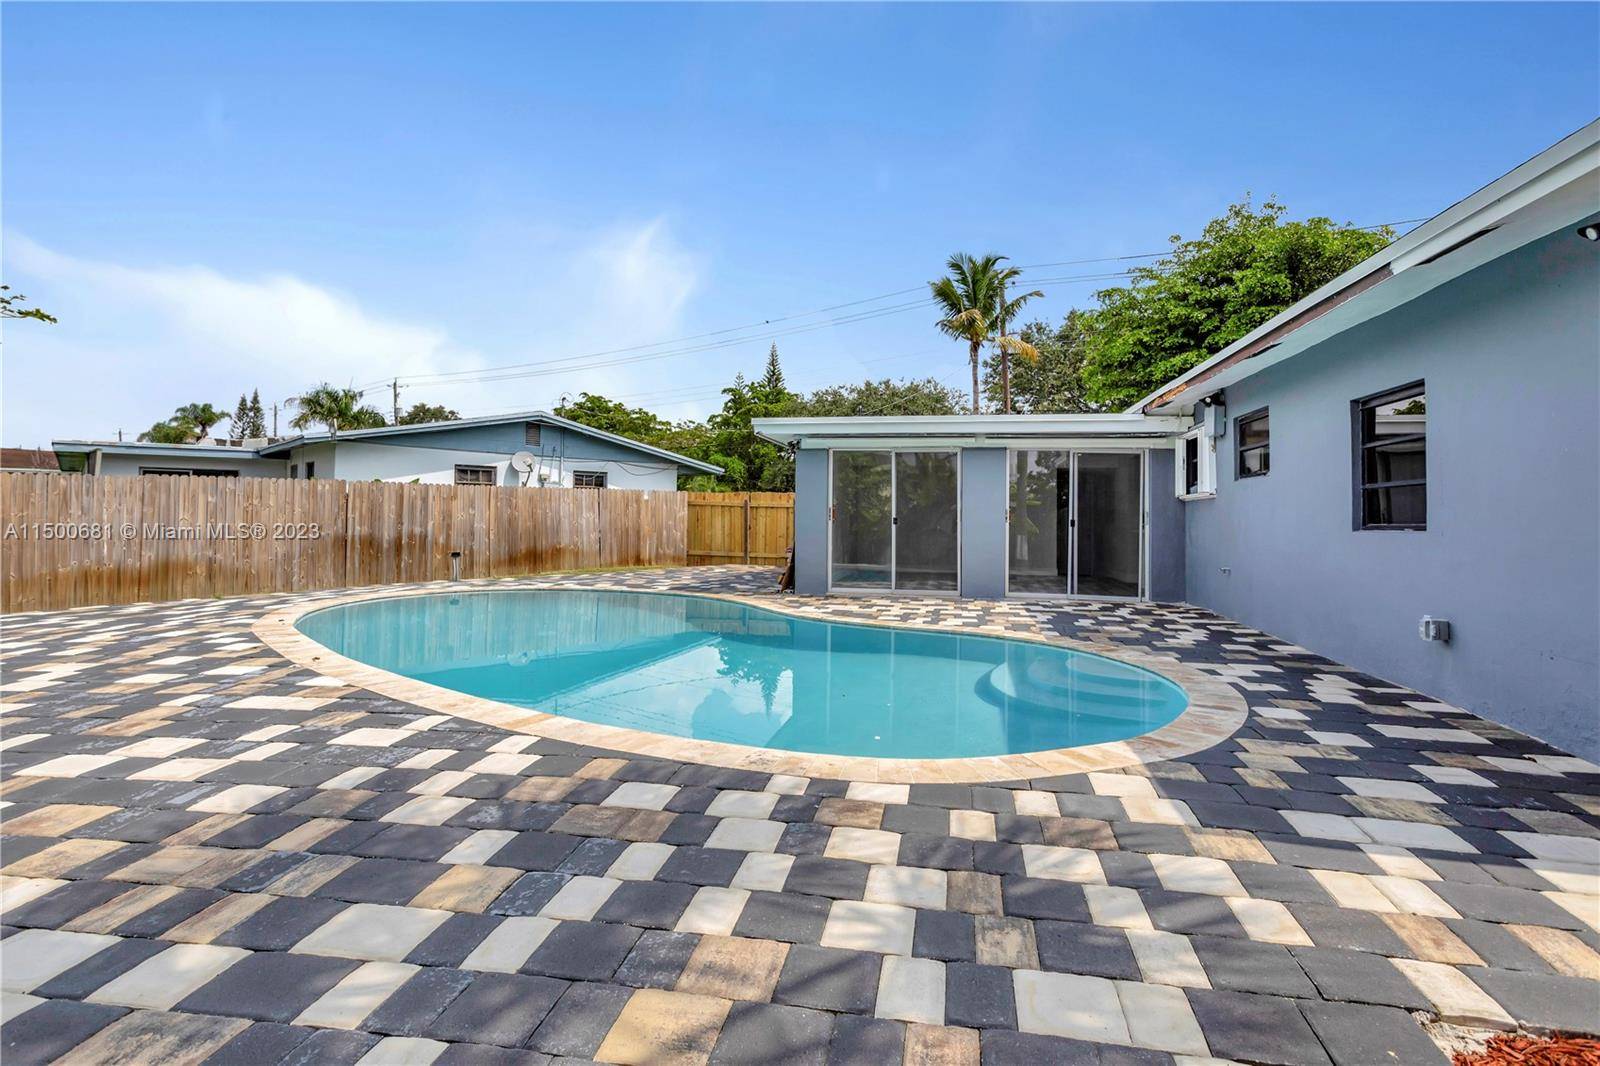 Attention Investors ! Spacious substantially remodeled 3 2 single home with a large outdoor pool is offered for Sale.